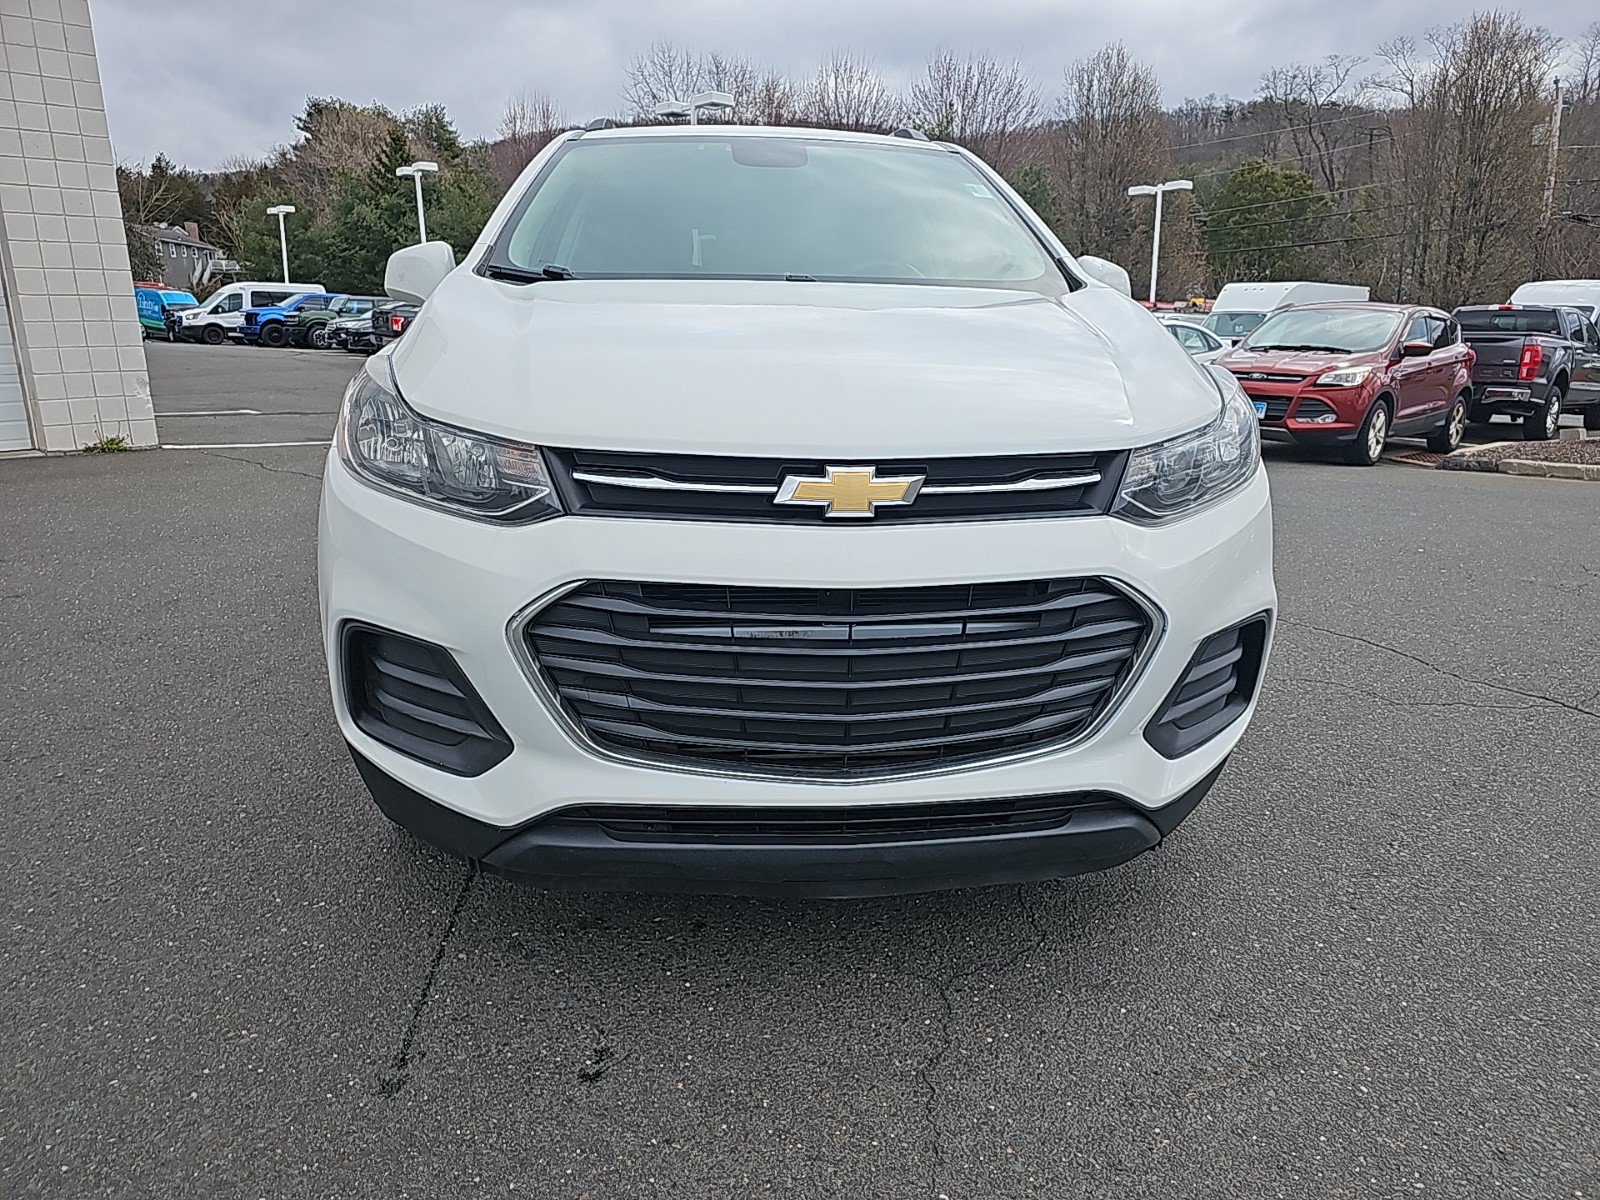 Used 2020 Chevrolet Trax LT with VIN 3GNCJPSB7LL256846 for sale in Plainville, CT